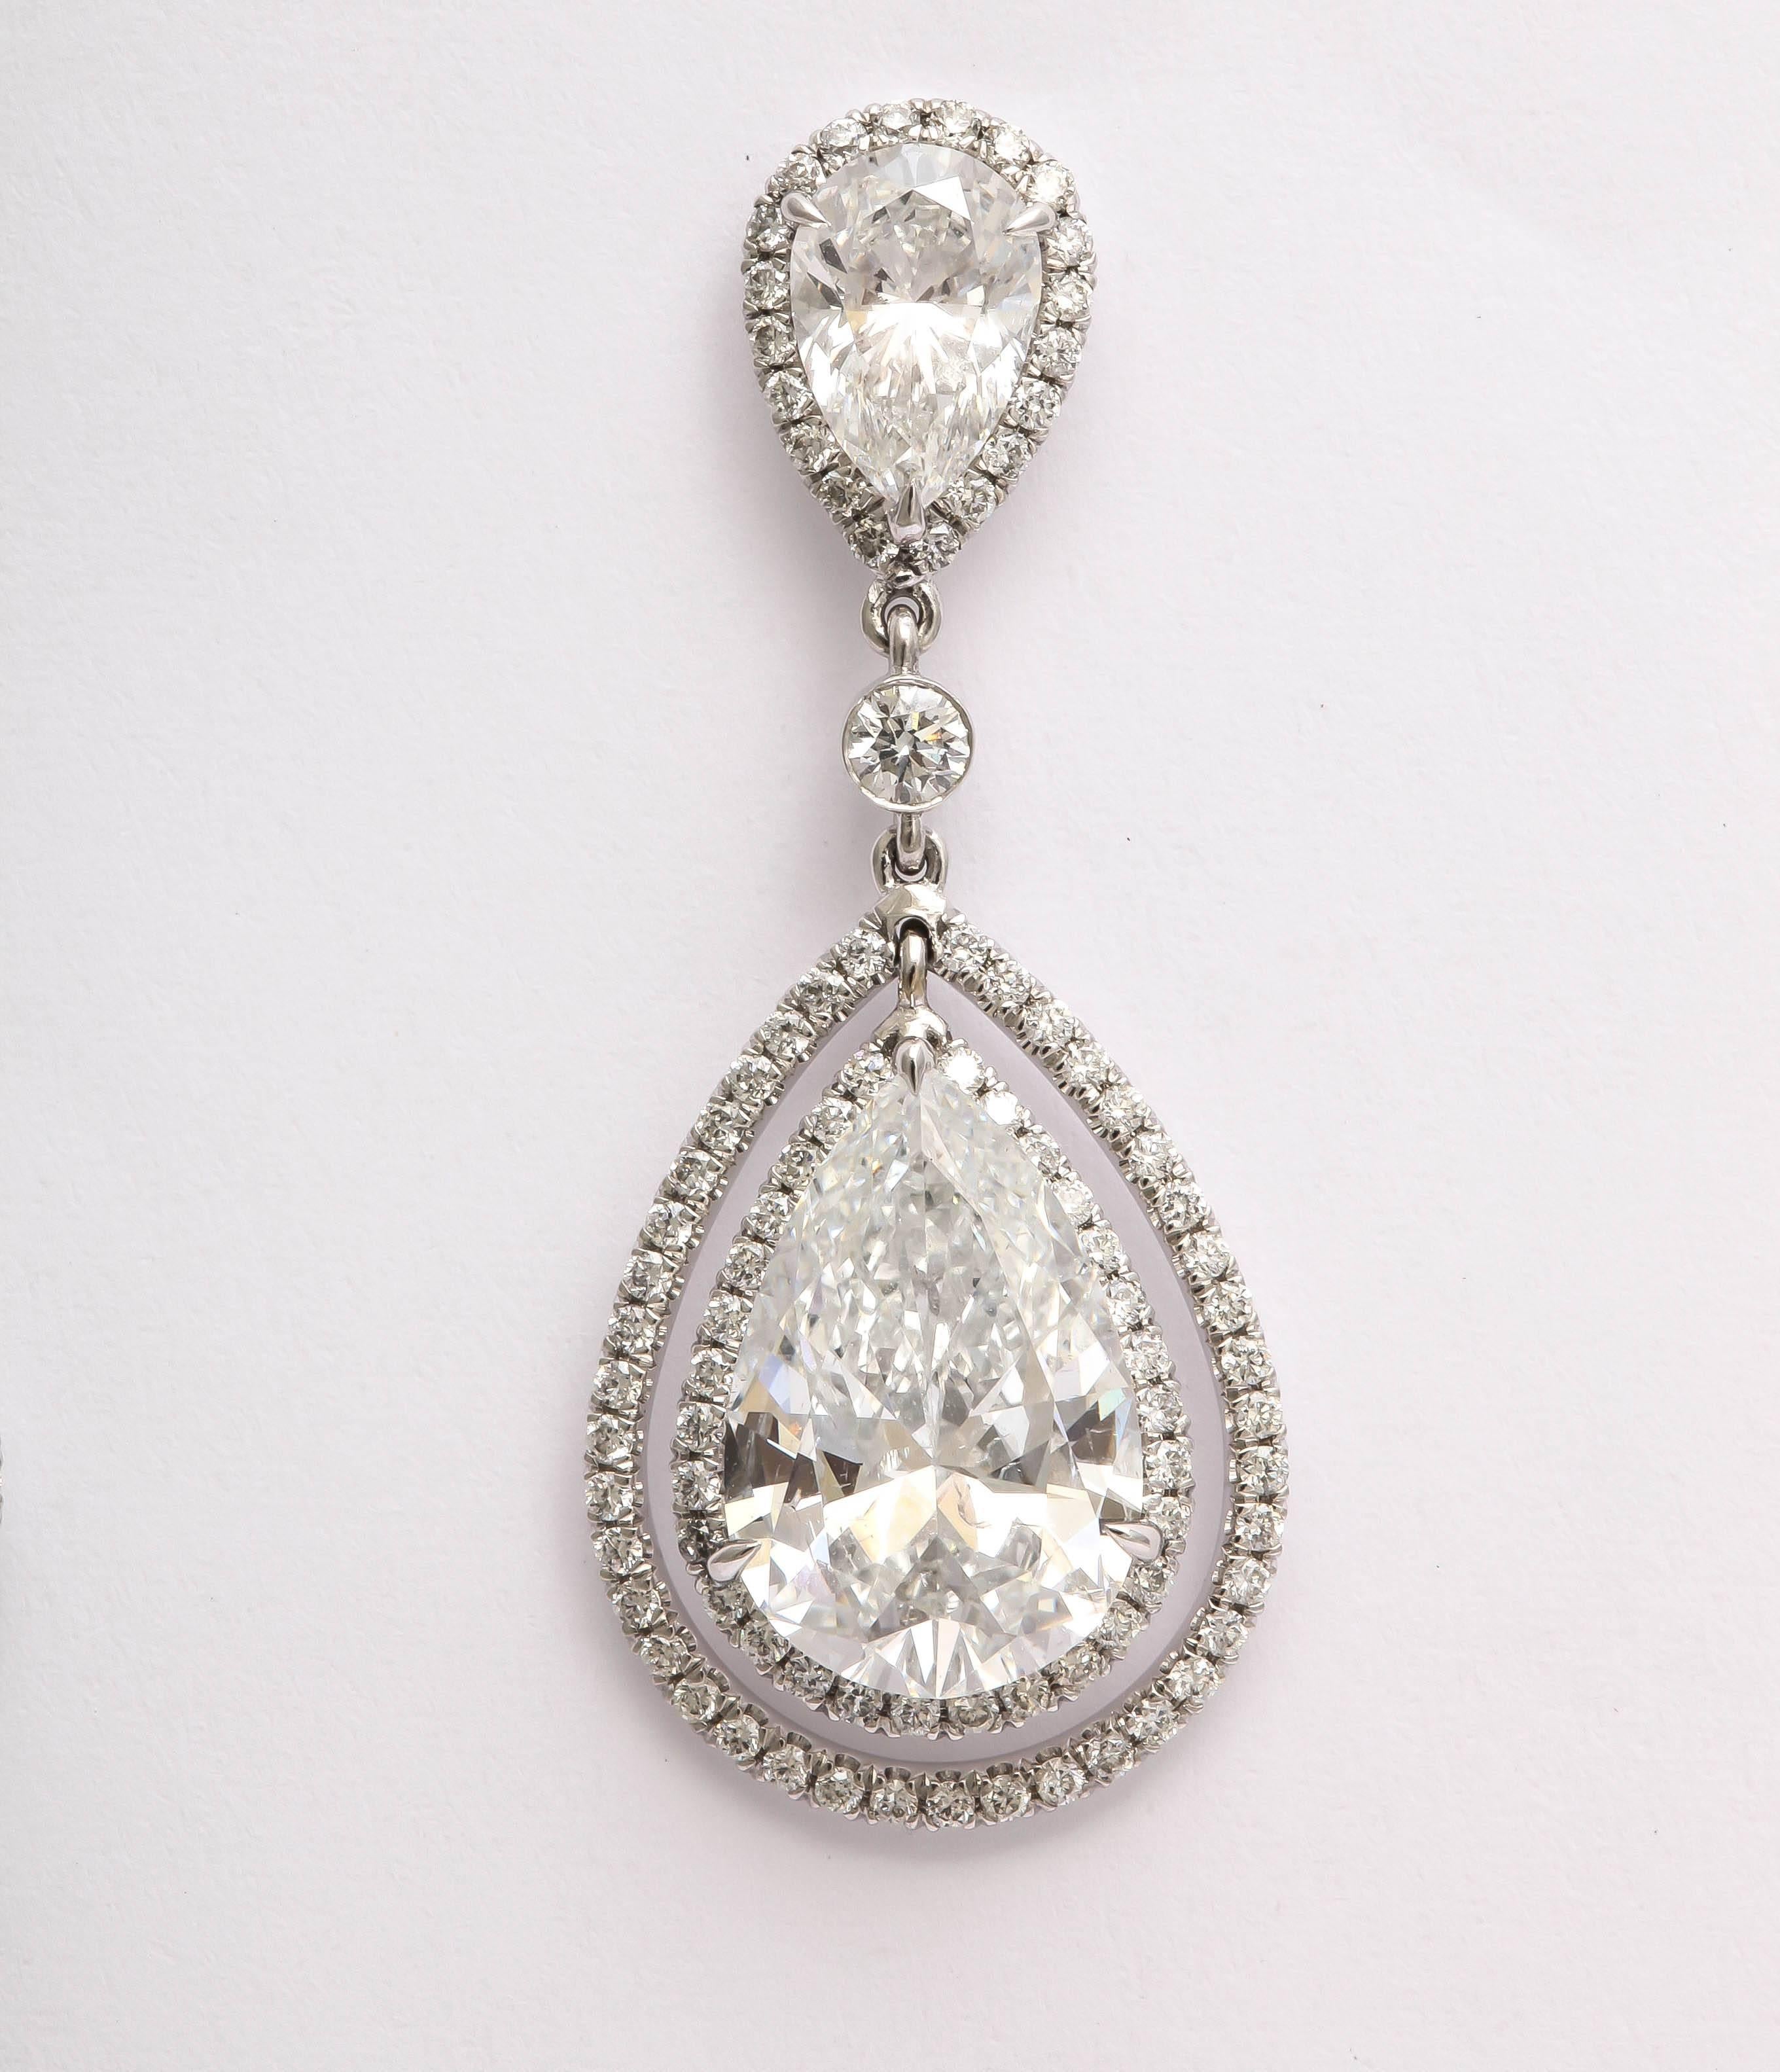 Amazing diamond  pear shaped dangling earrings. They are made in 18 kt white gold with a post. The top 2 pear shapes are 1.58 ct  for the pair, and are a G color, SI 1 clarity. The large bottom pear shapes  are 6.54ct for the pair and are F color,